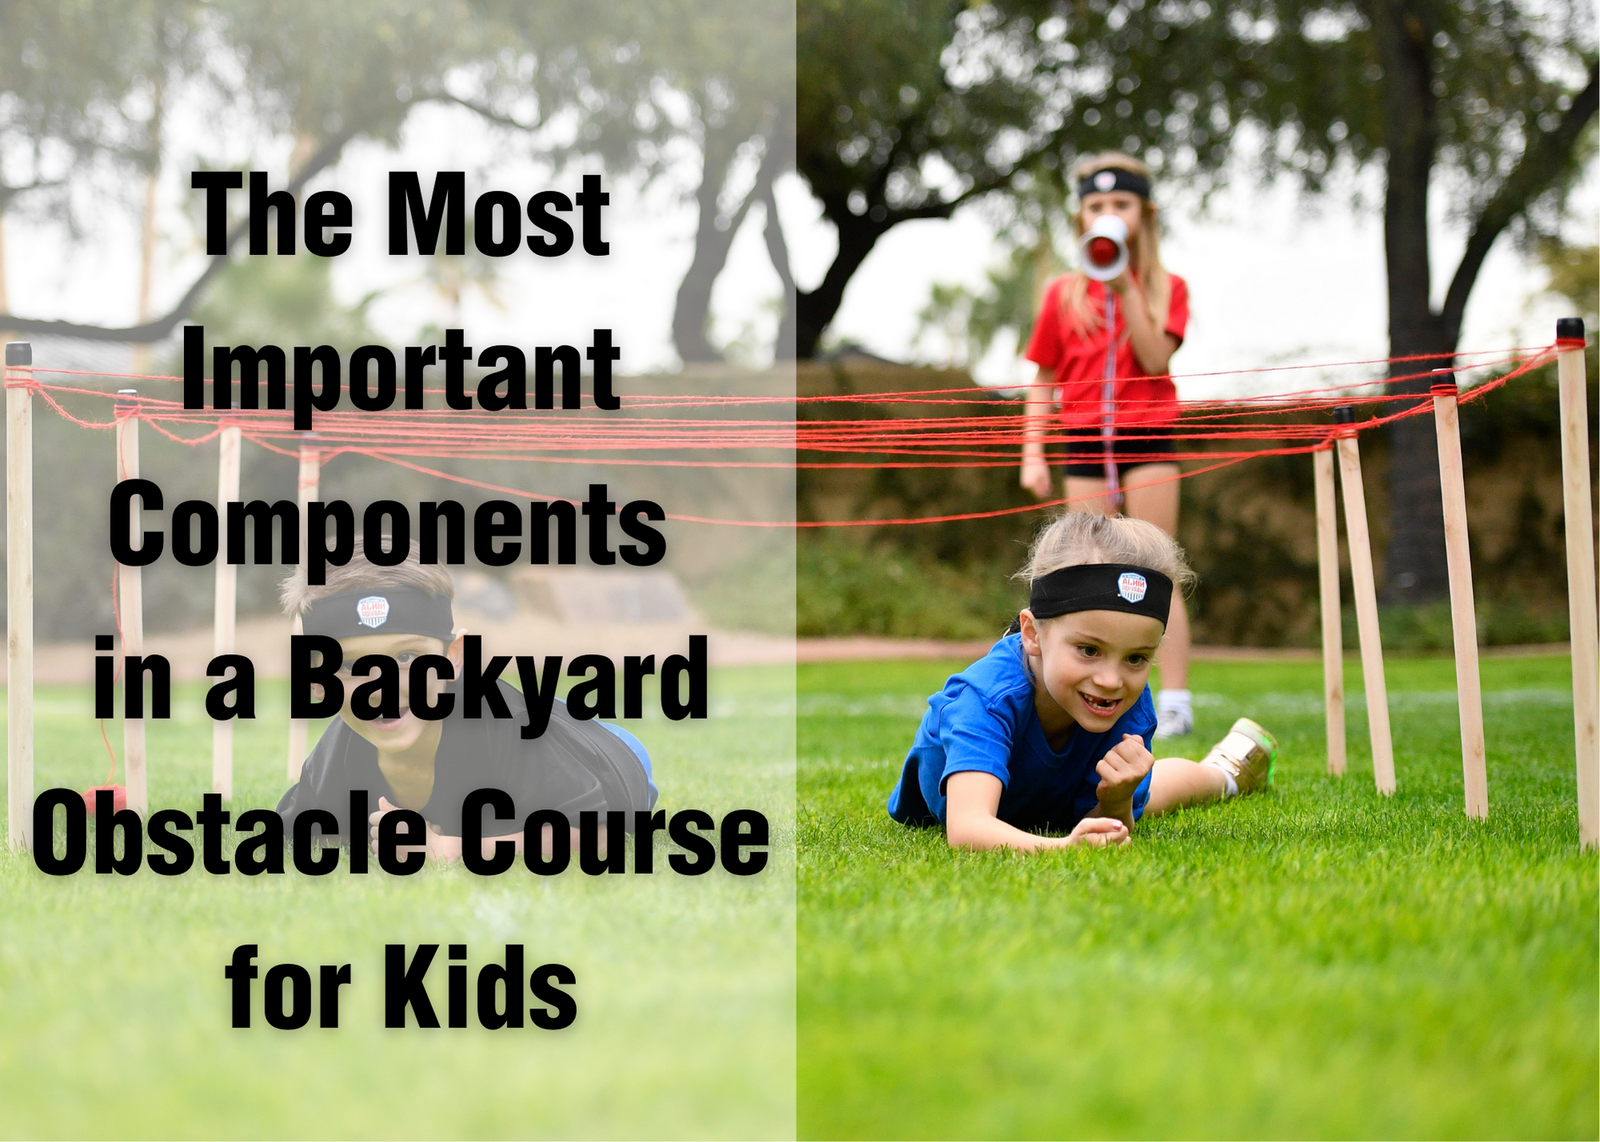 The Most Important Components in a Backyard Obstacle Course for Kids